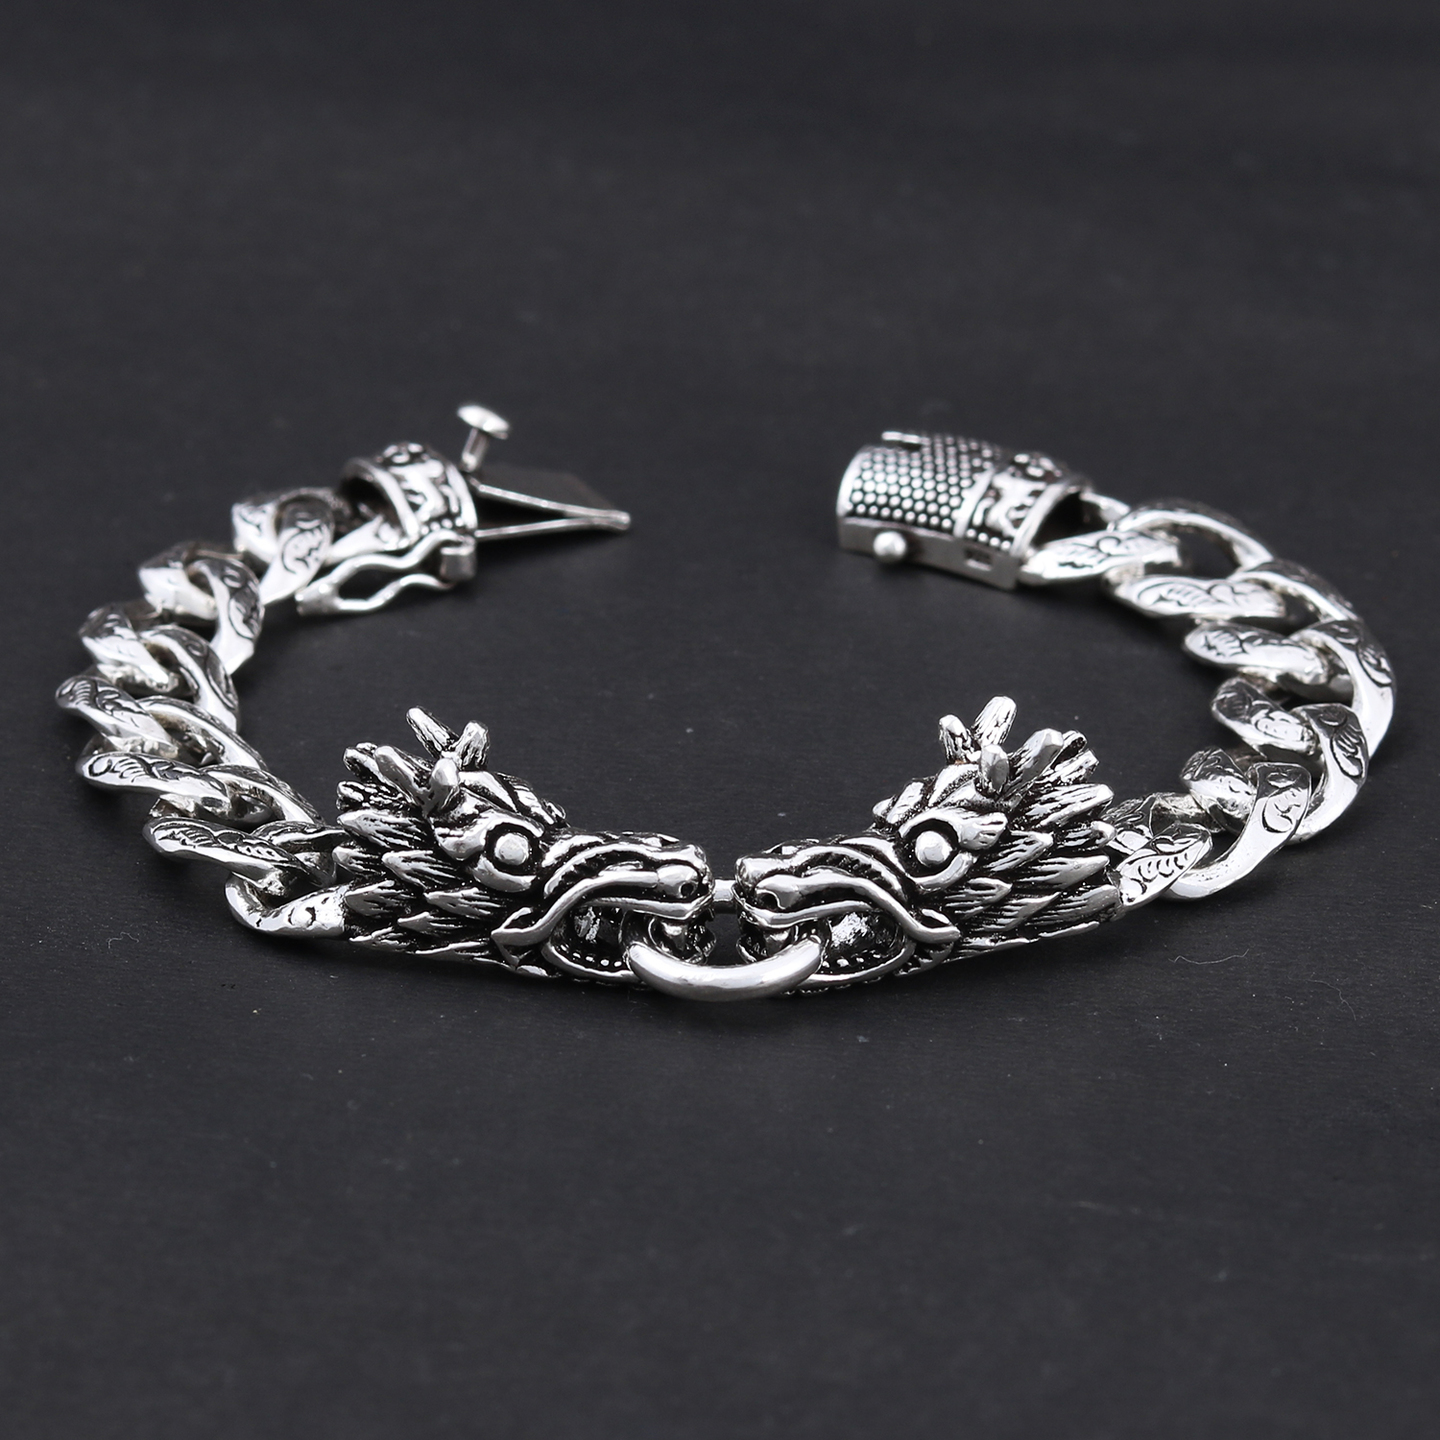 925 Solid Sterling Silver Dragon Curb Chain Bracelet - Length 8 Inches - Silver Oxidize Jewelry -Bracelet For Strength & Good Fortune